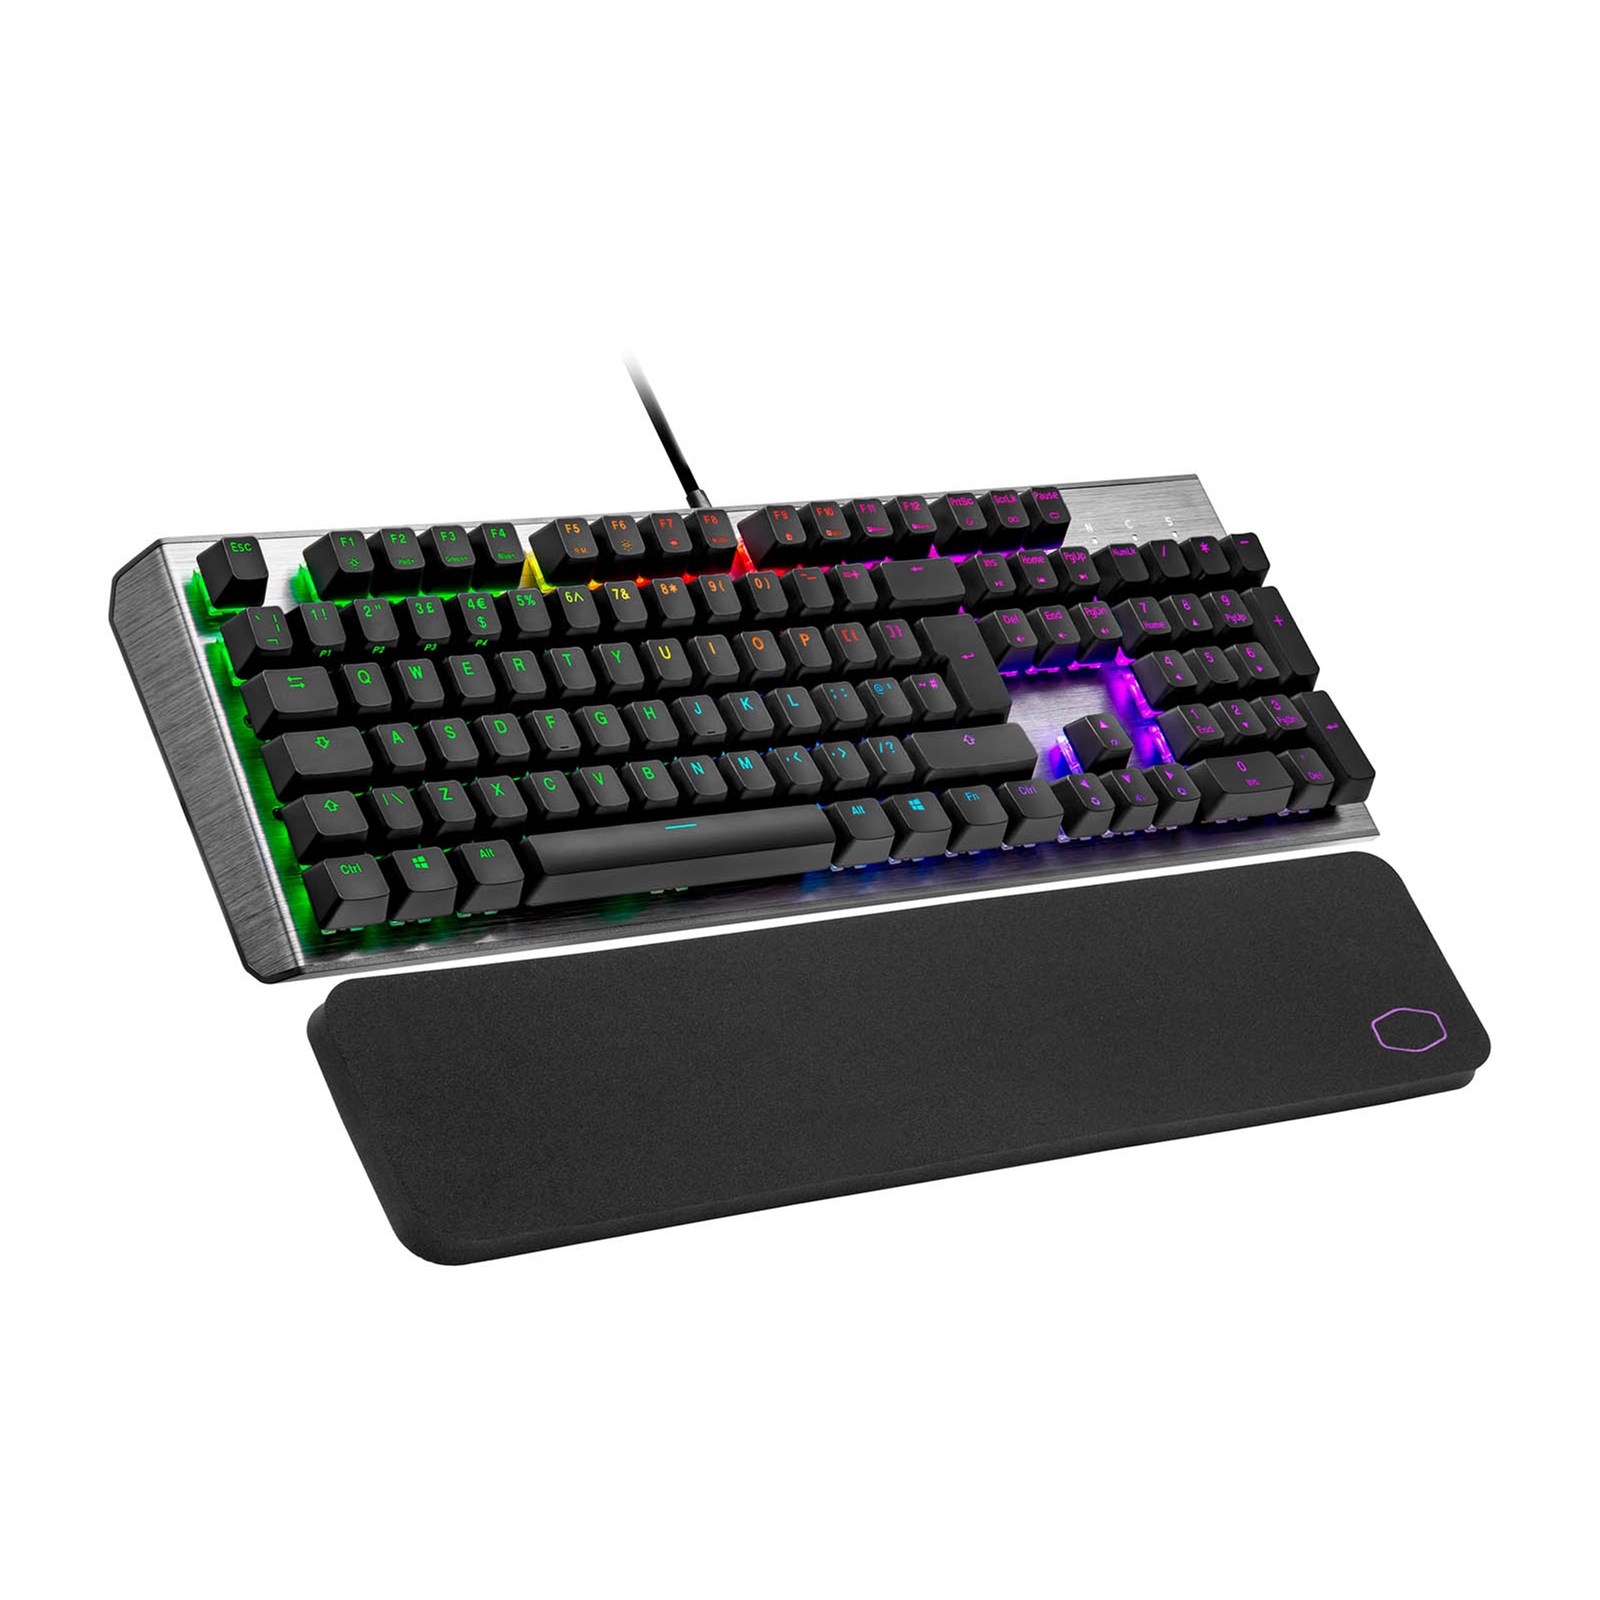 Cooler Master Ck550 V2 Mechanical Gaming Keyboard With Red Ttc Switches Ck 550 Gktr1 Uk Ccl Computers